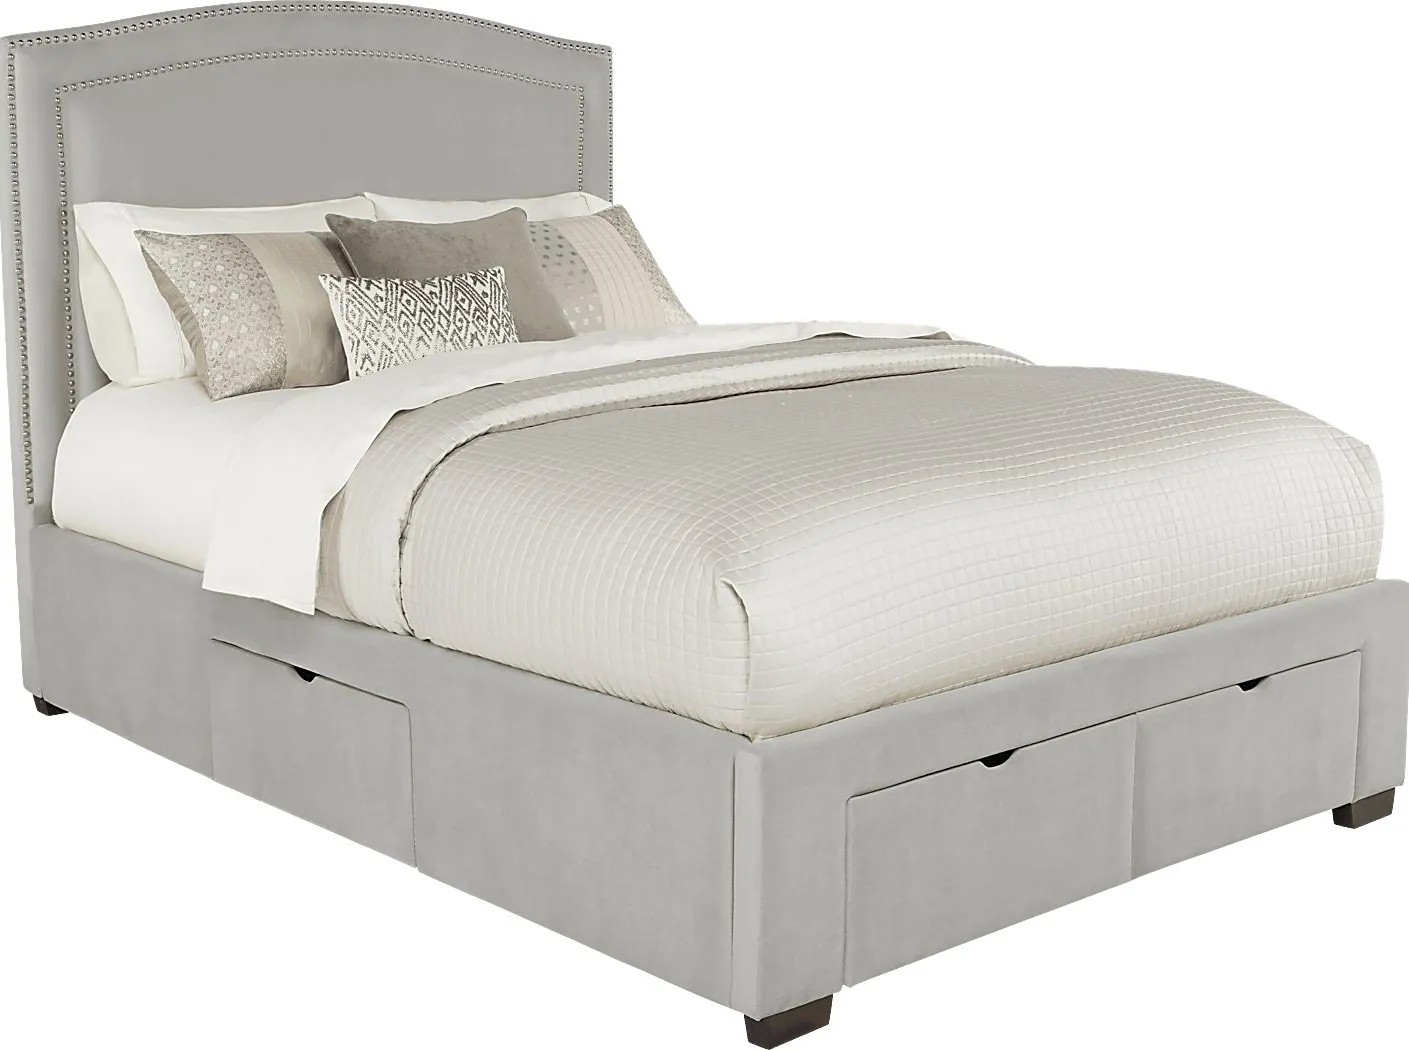 Loden Gray 3 Pc Queen Upholstered Bed with 4 Drawer Storage